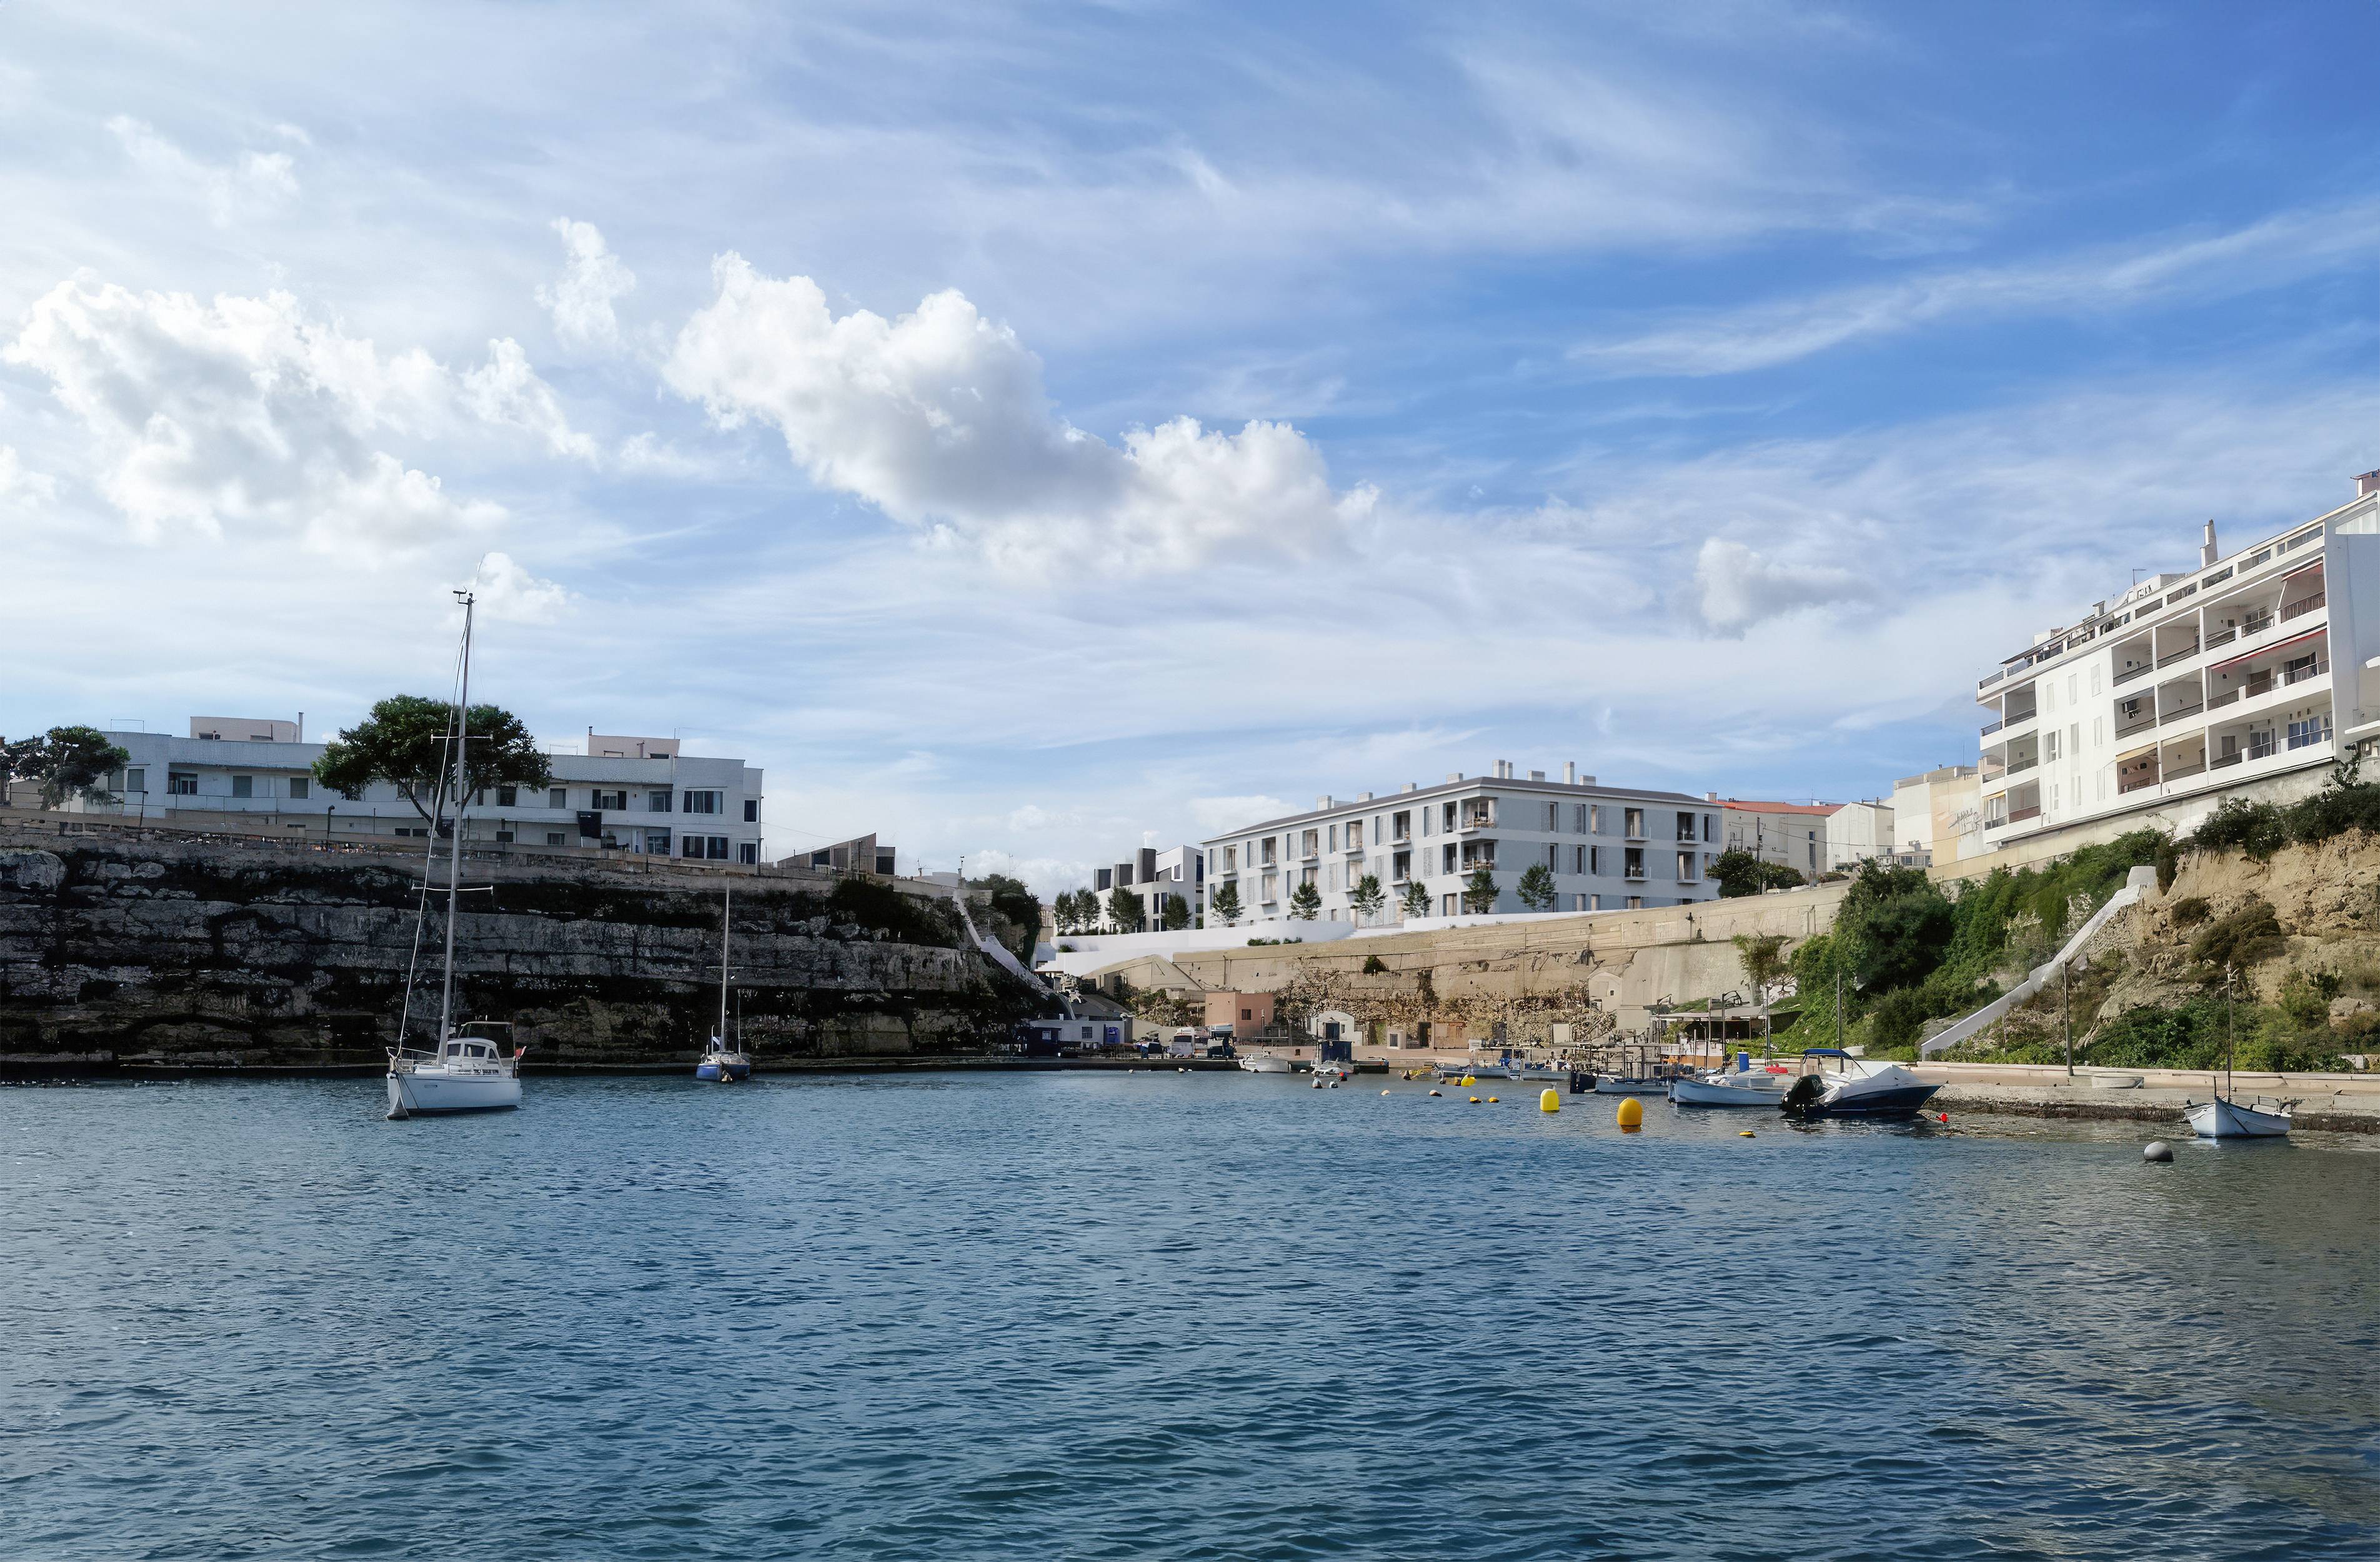 Promotion - Residencial Cala Corb, A new front line residential development in the harbour of Mahón, Menorca